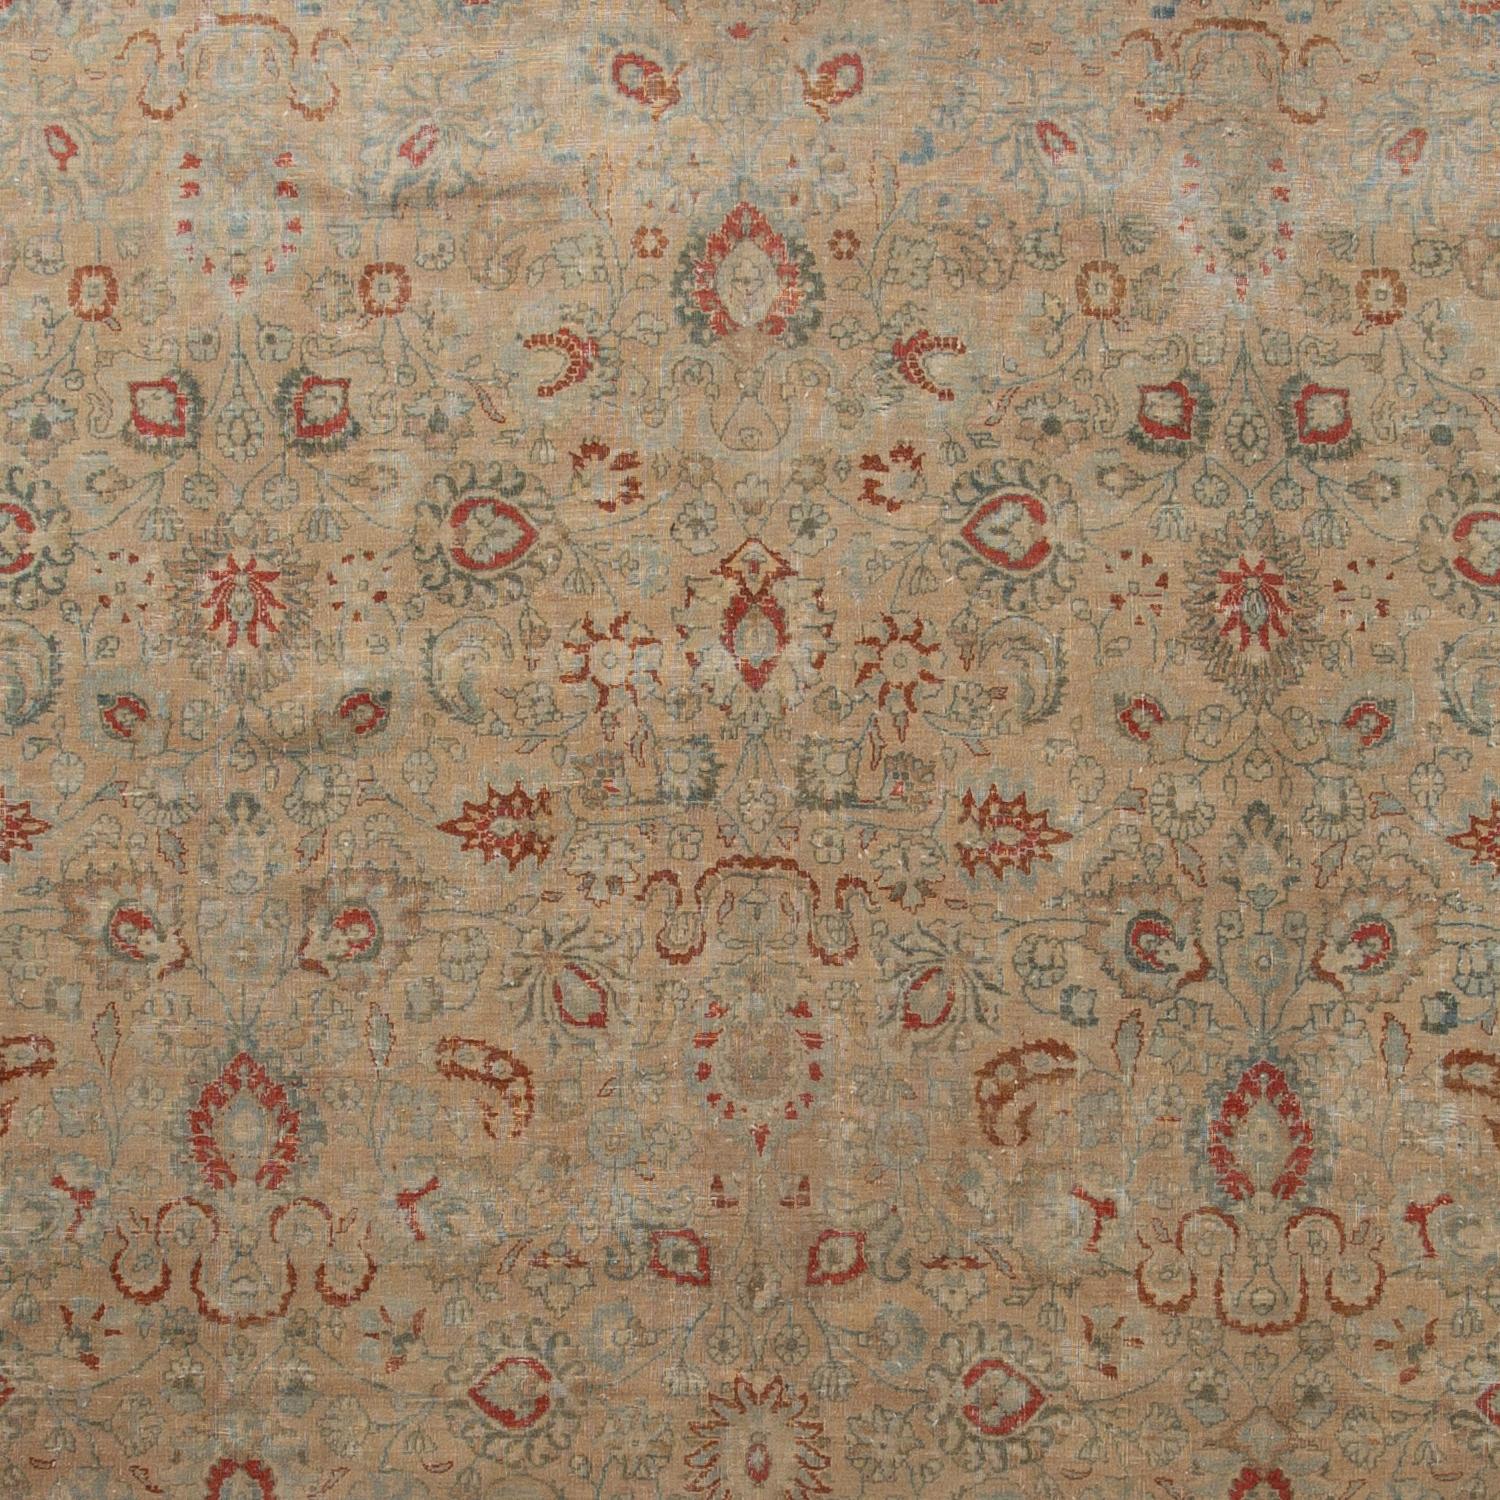 Expertly hand-knotted in Turkey with an extraordinary level of precision, this Vintage Wool Rug - 13'2